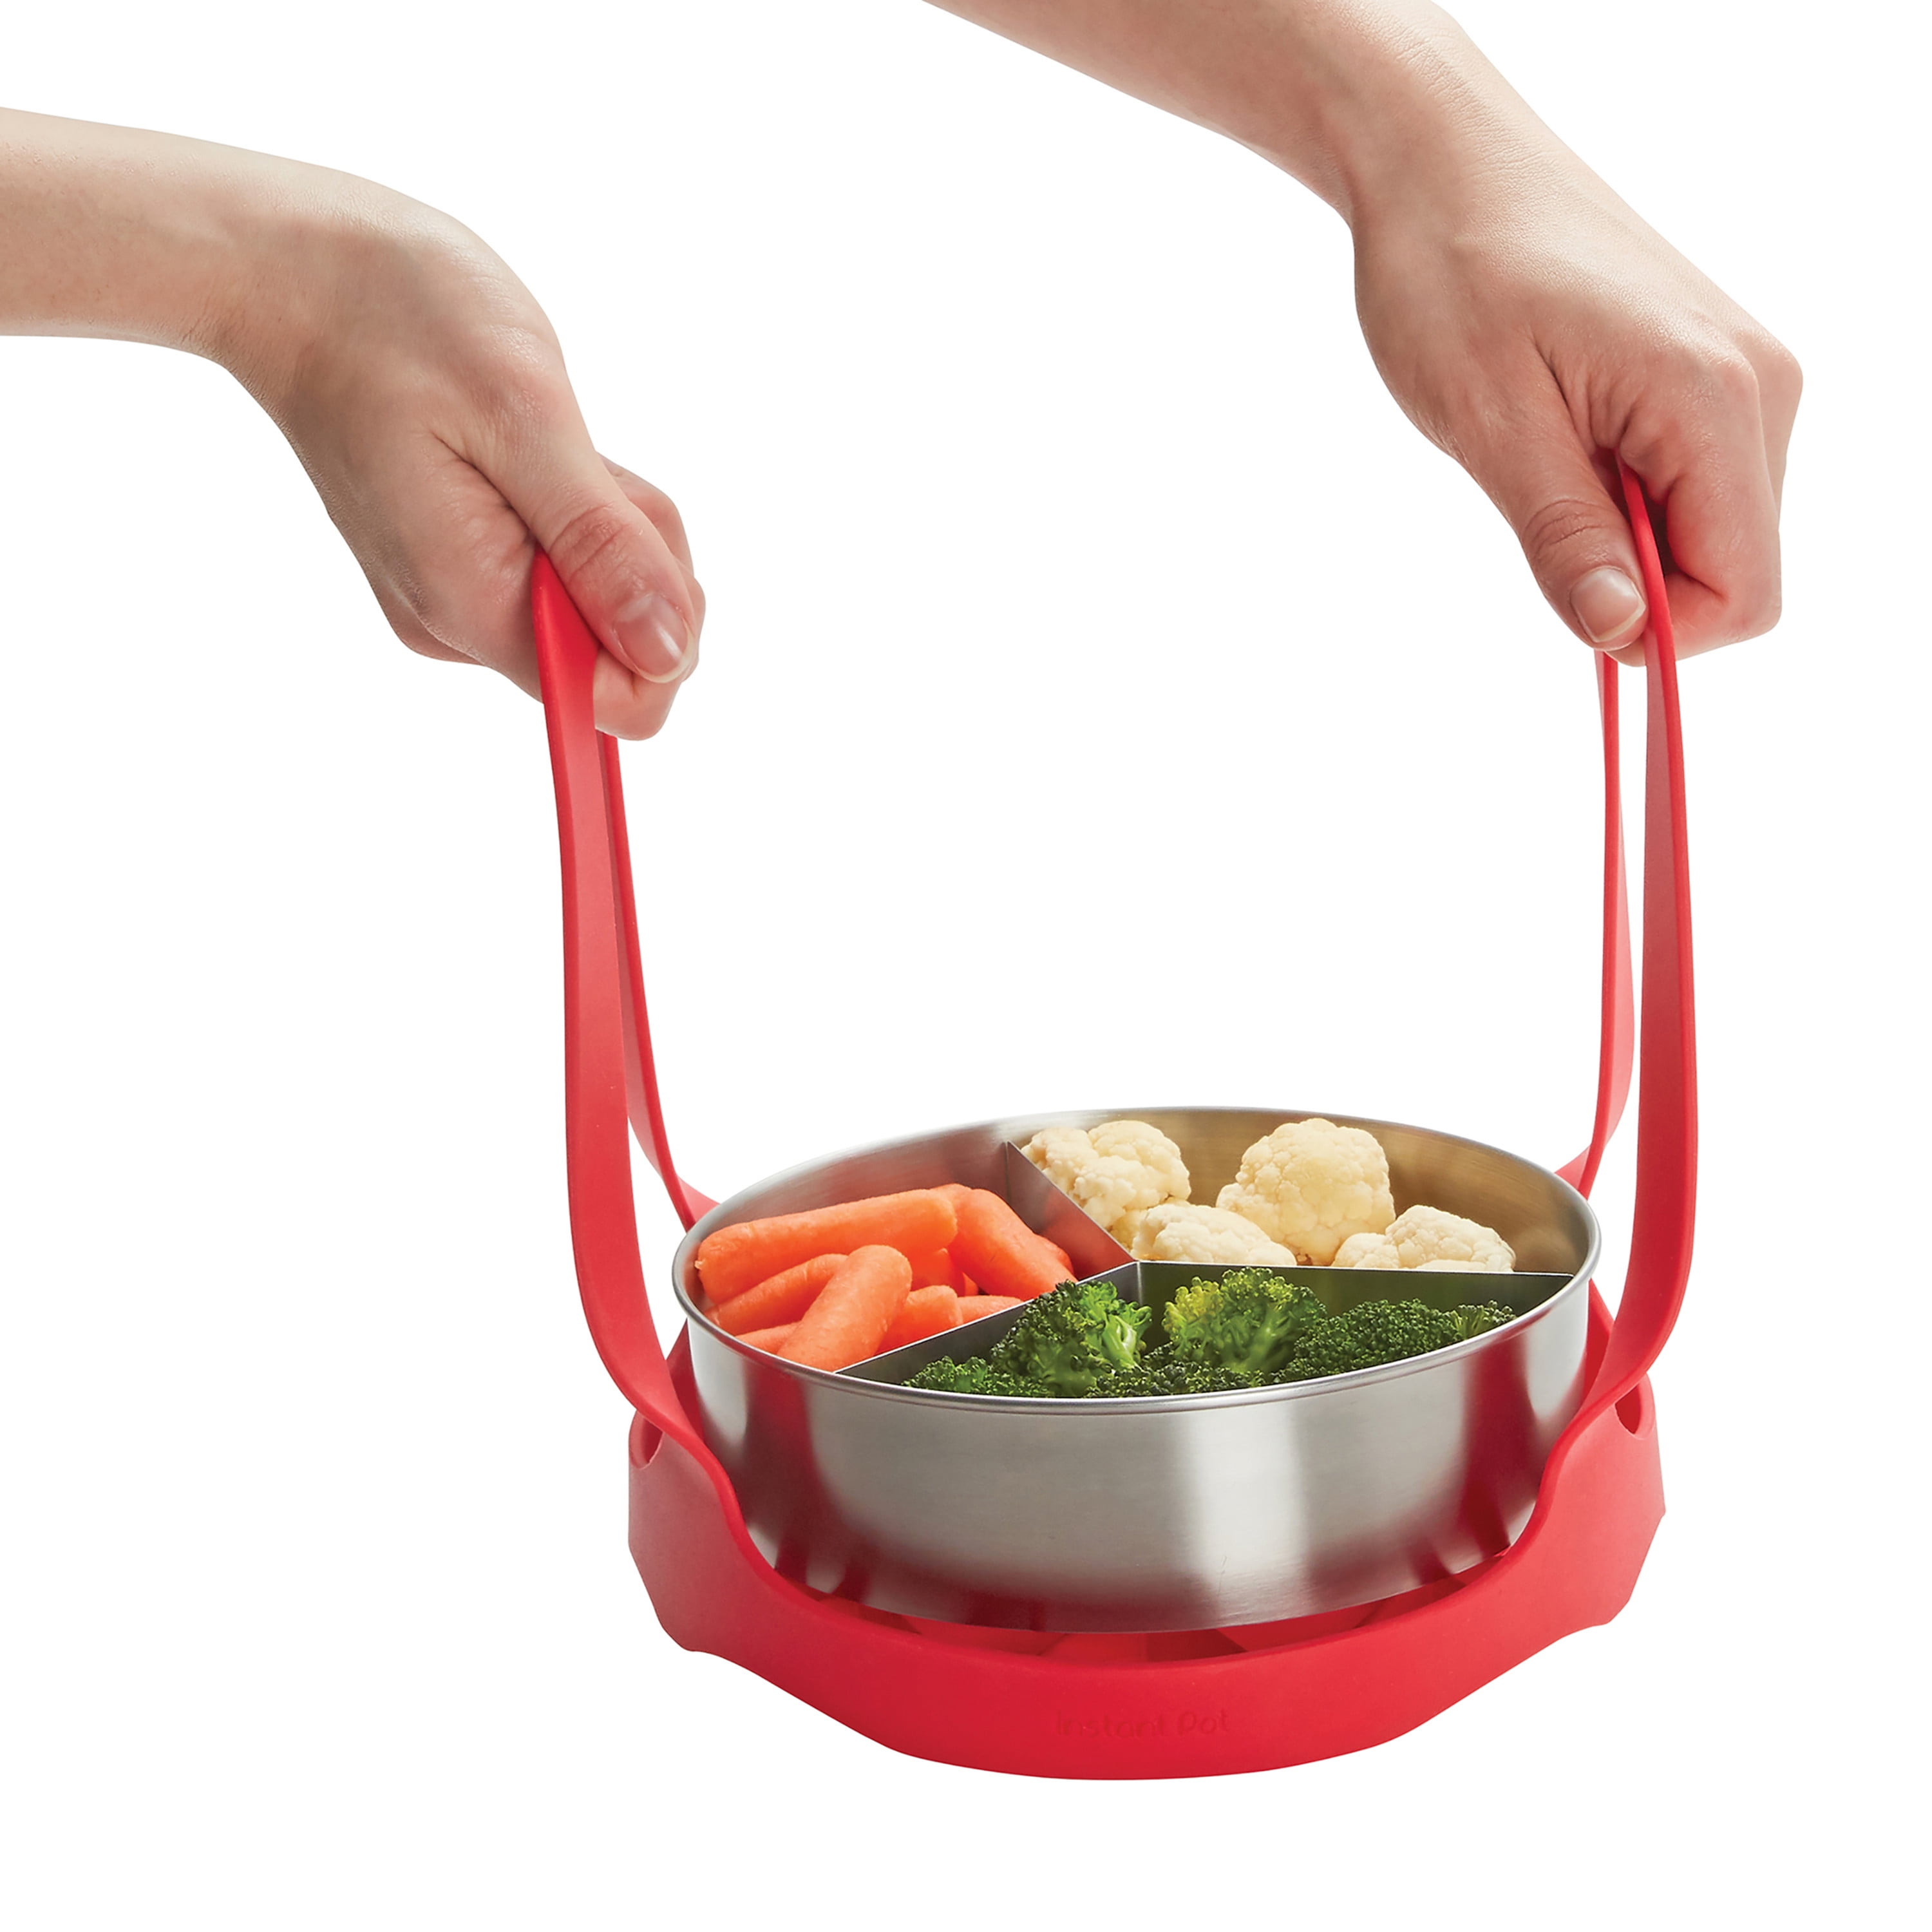 ddLUCK Pressure Cooker Sling,silicone Bakeware Sling for 6 Qt/8 qt Instant Pot, Ninja Foodi and Multi-function Cooker Anti-scalding Bakeware Lifter